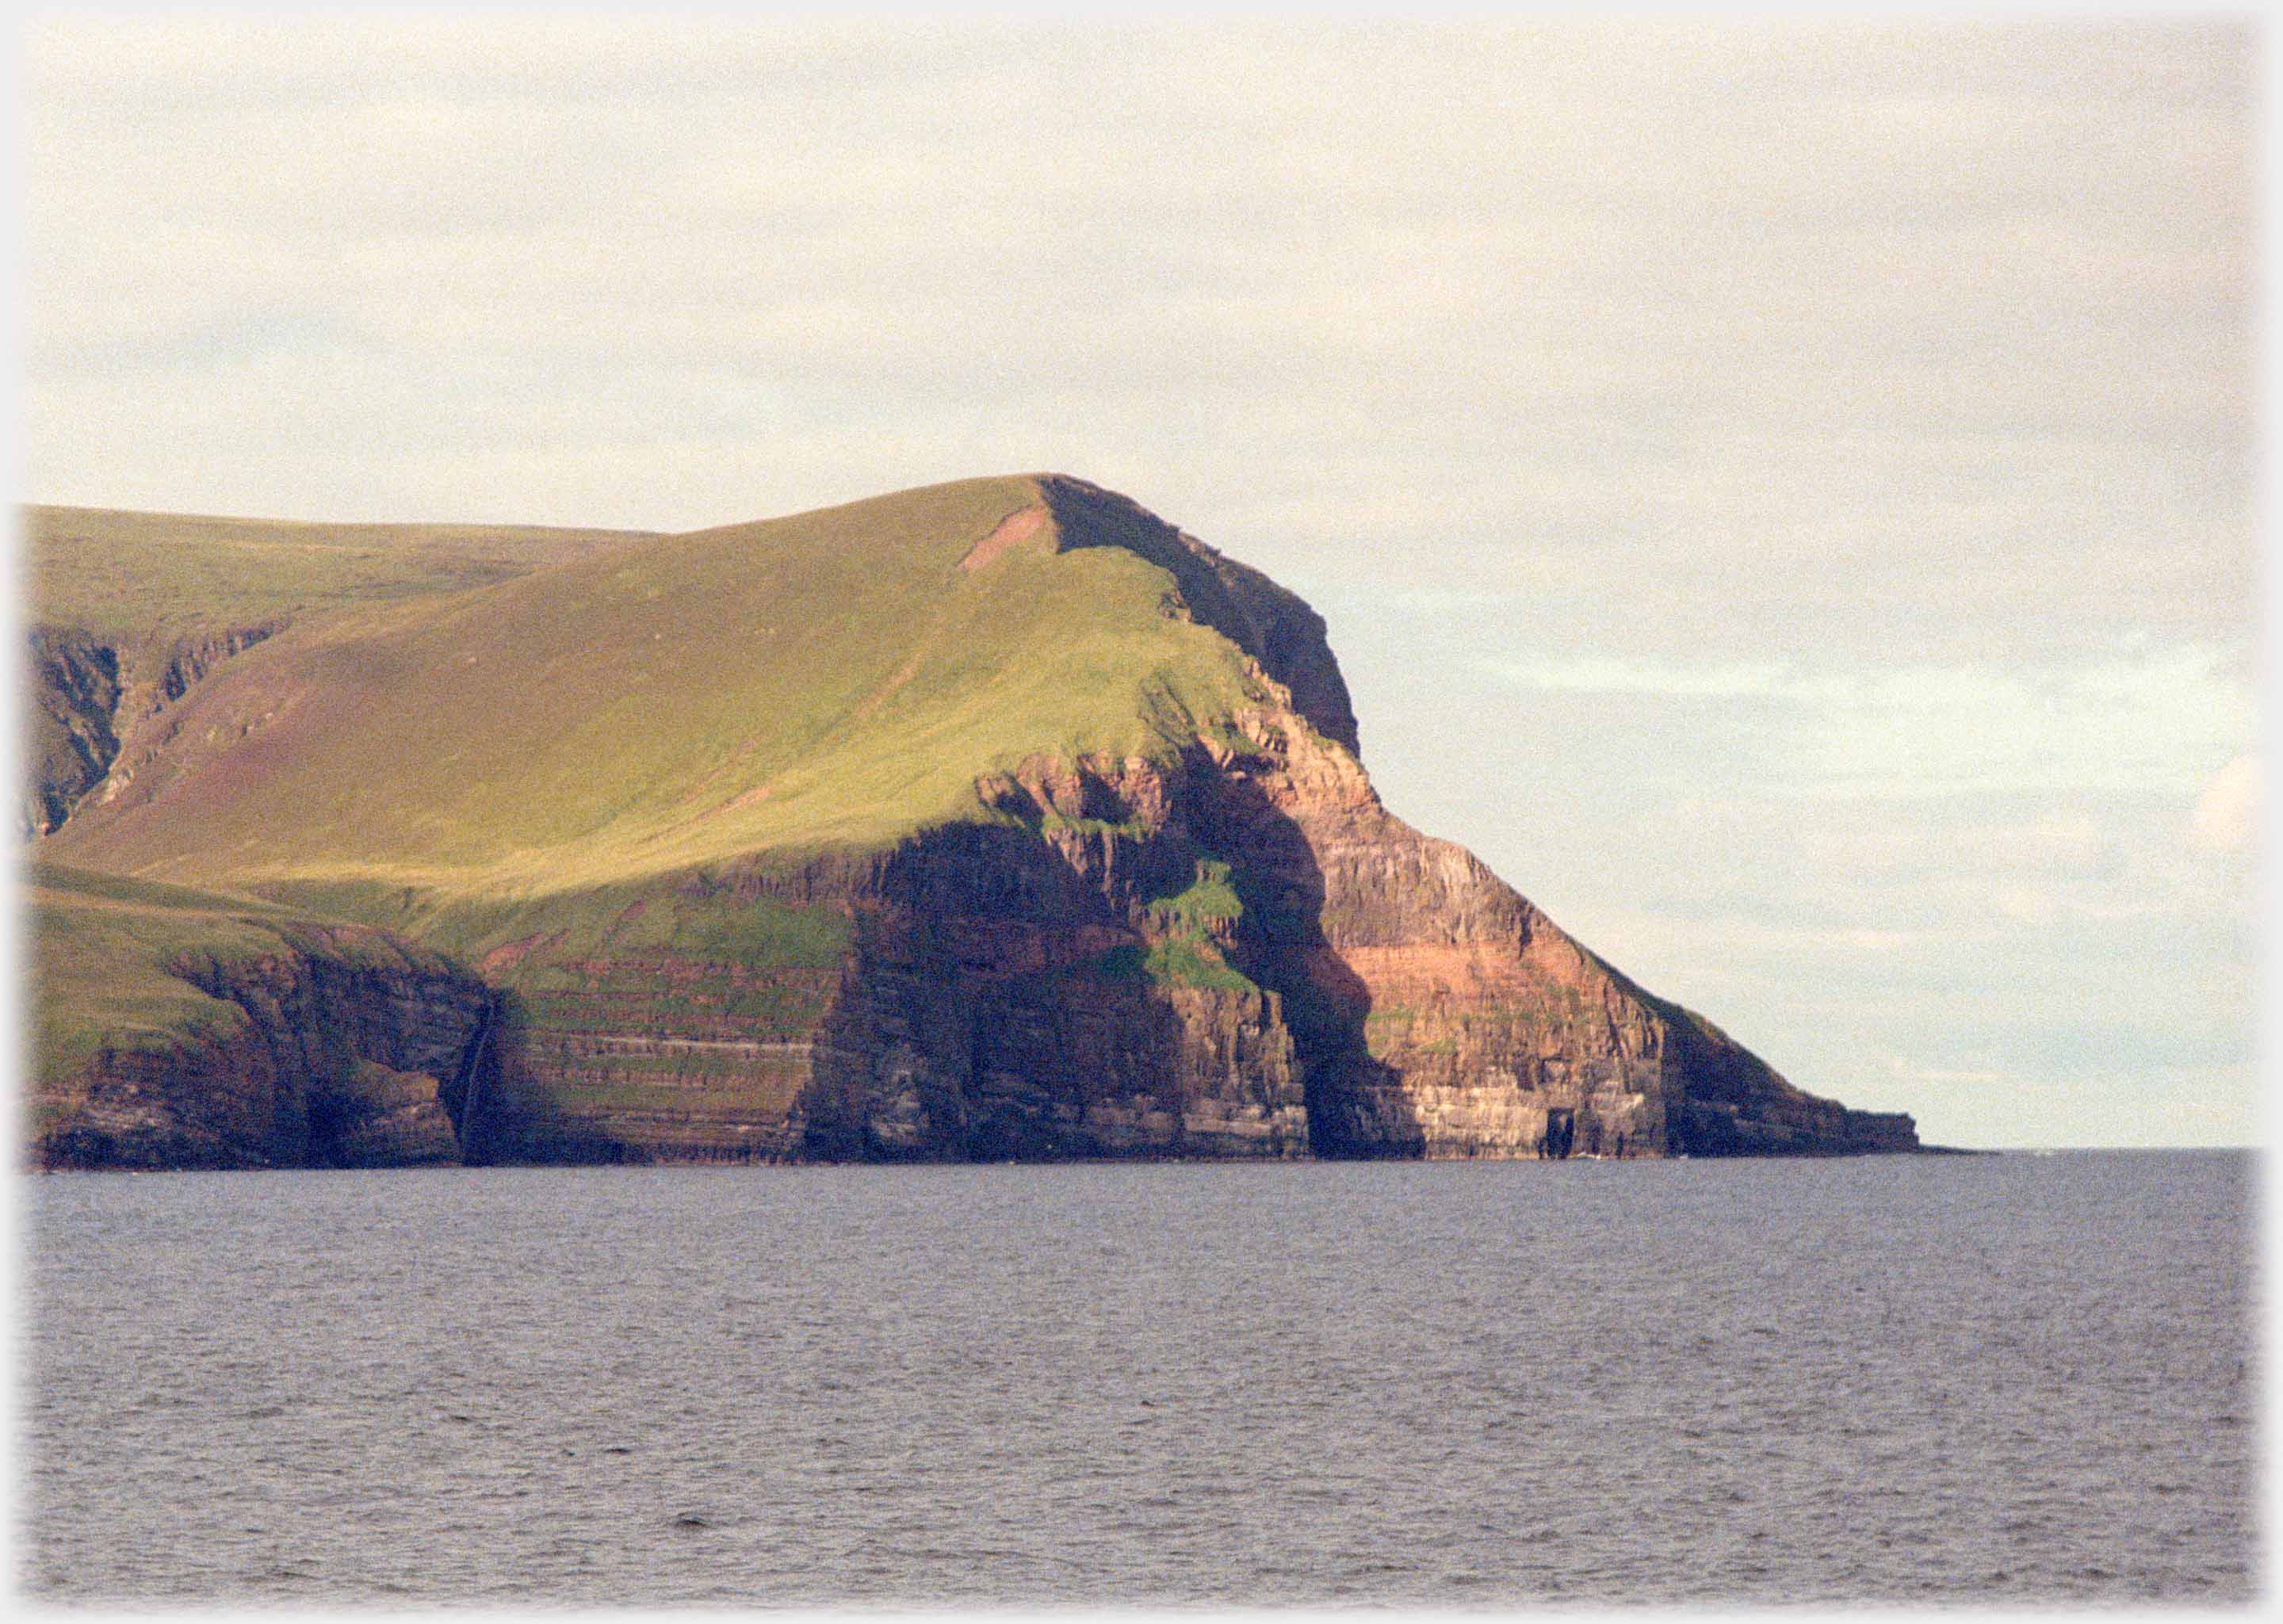 Cliffs with forty-five degree slope down to sea, sun  and shaddow on the cliffs surface.